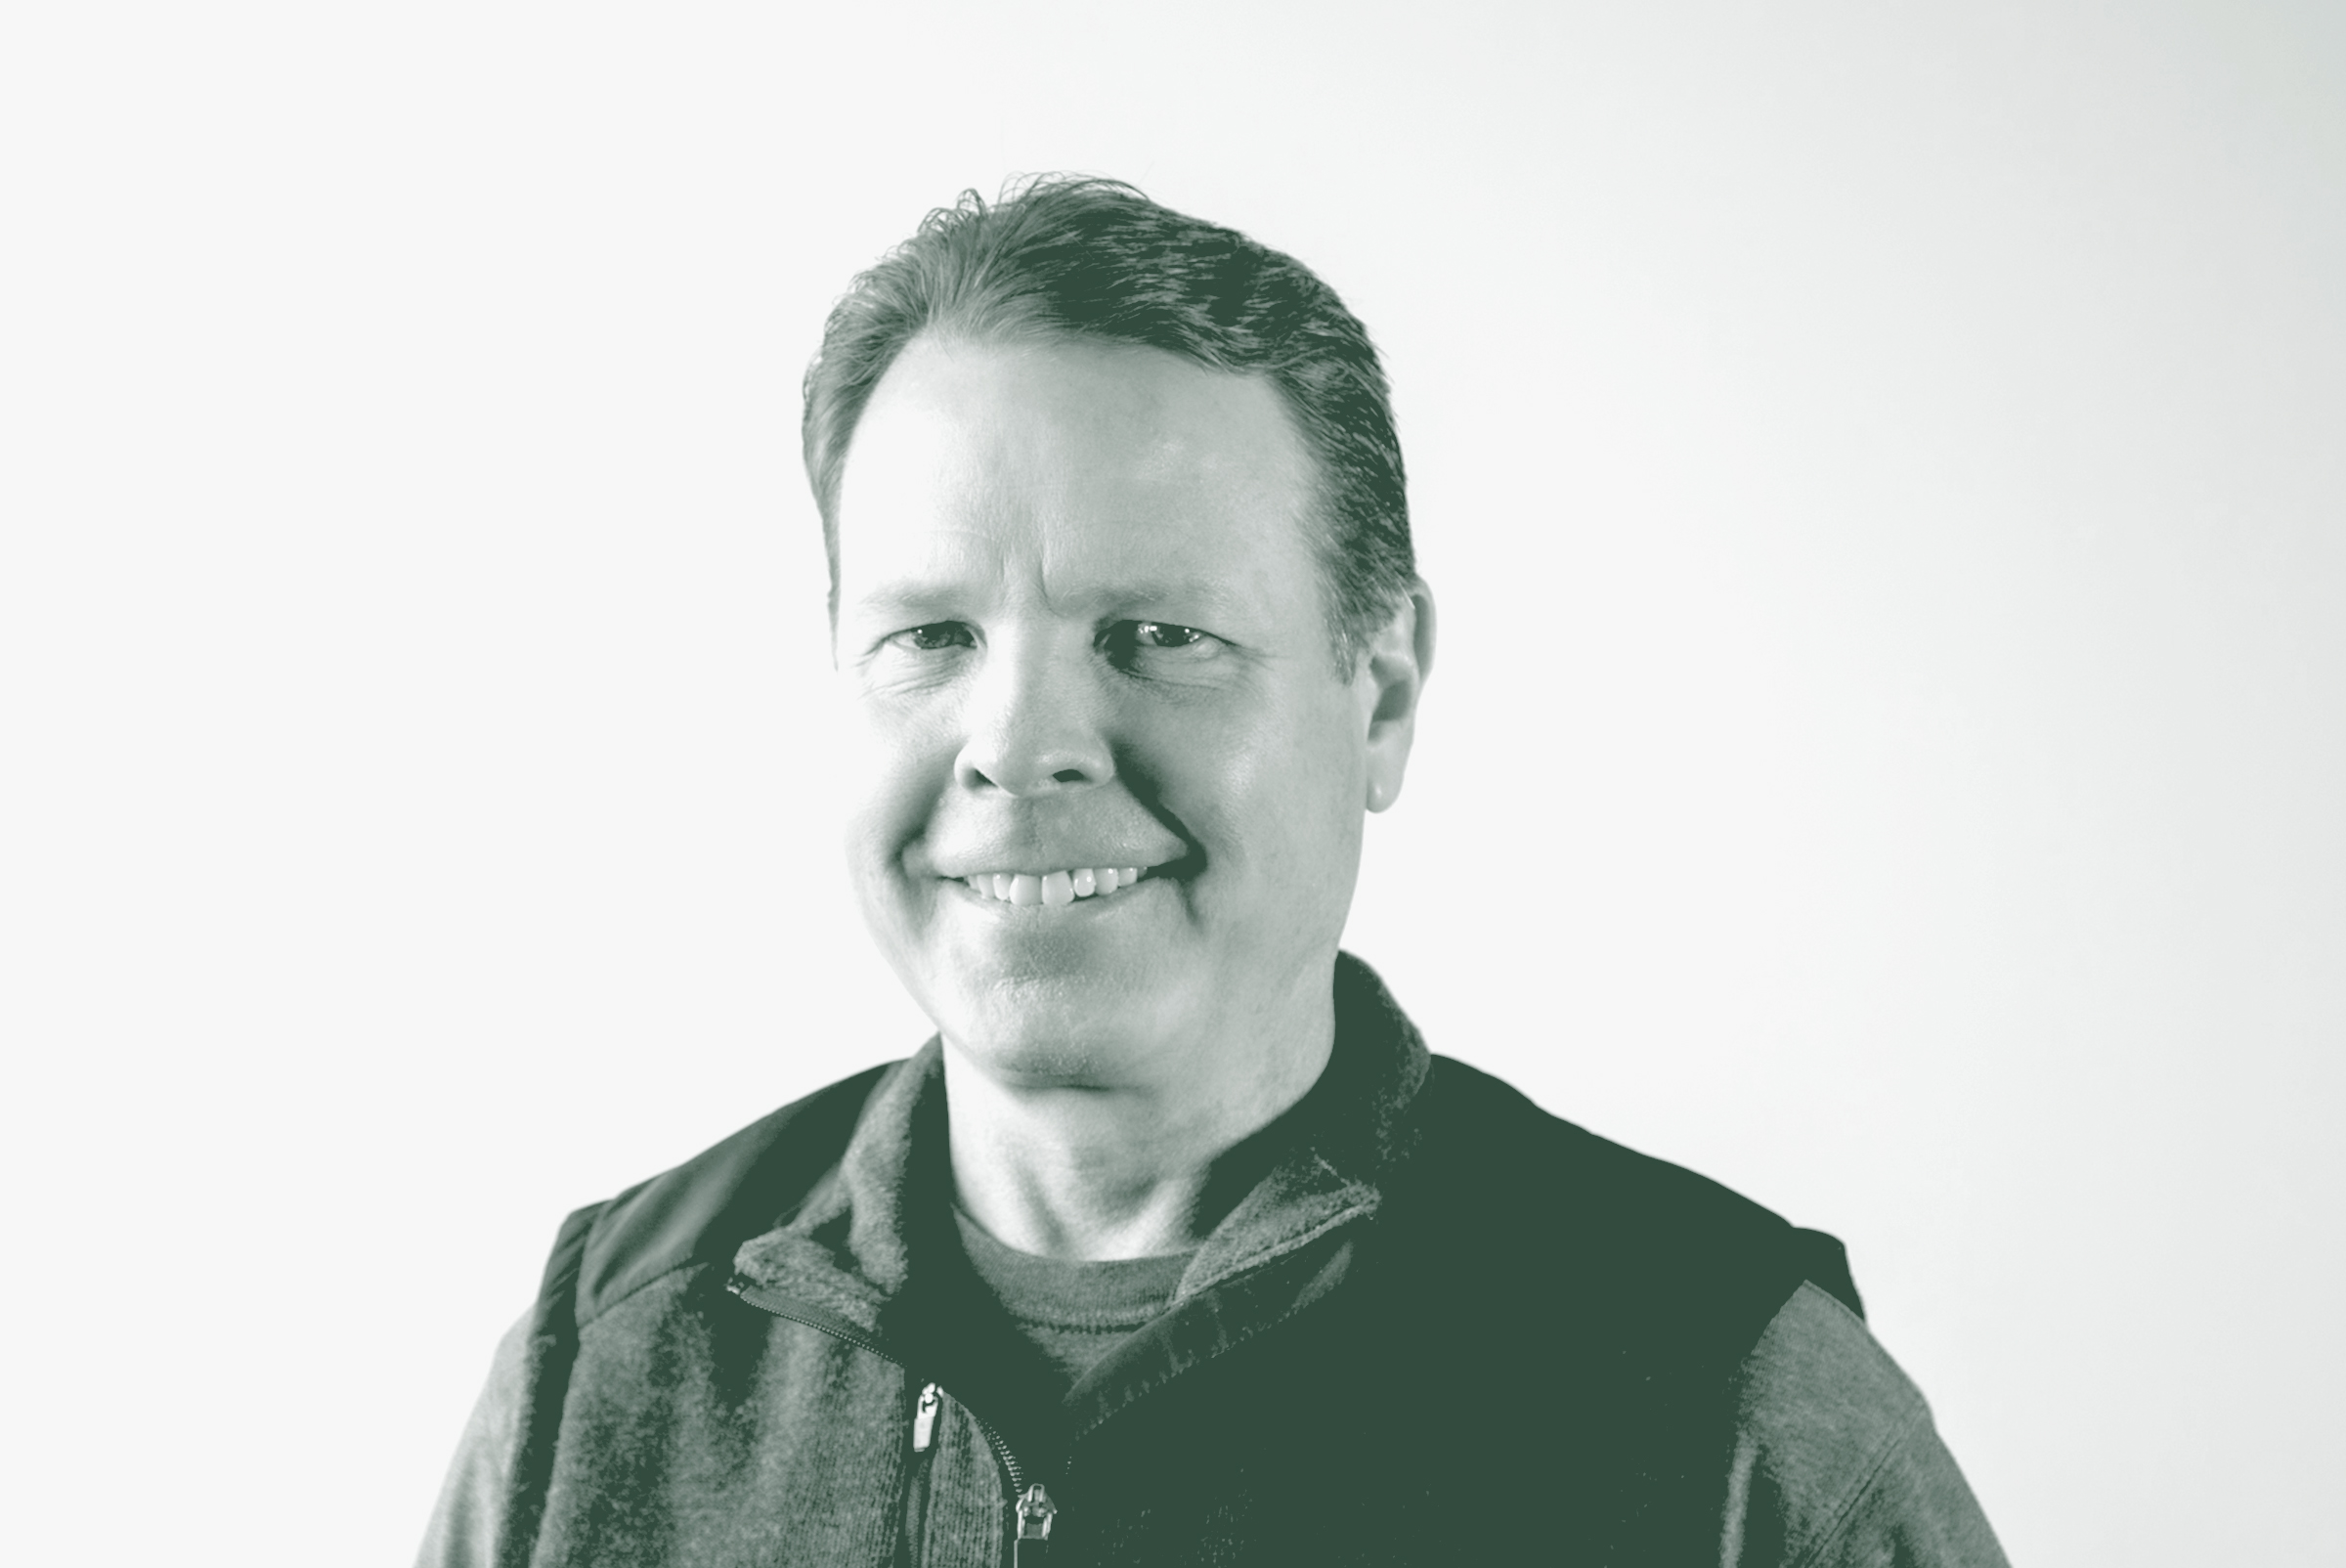 A black and white portrait of Kent Pontious, an Associate Principal and Studio Director with GFF in the Mixed-Use & Multifamily Studio, in front of a white background.